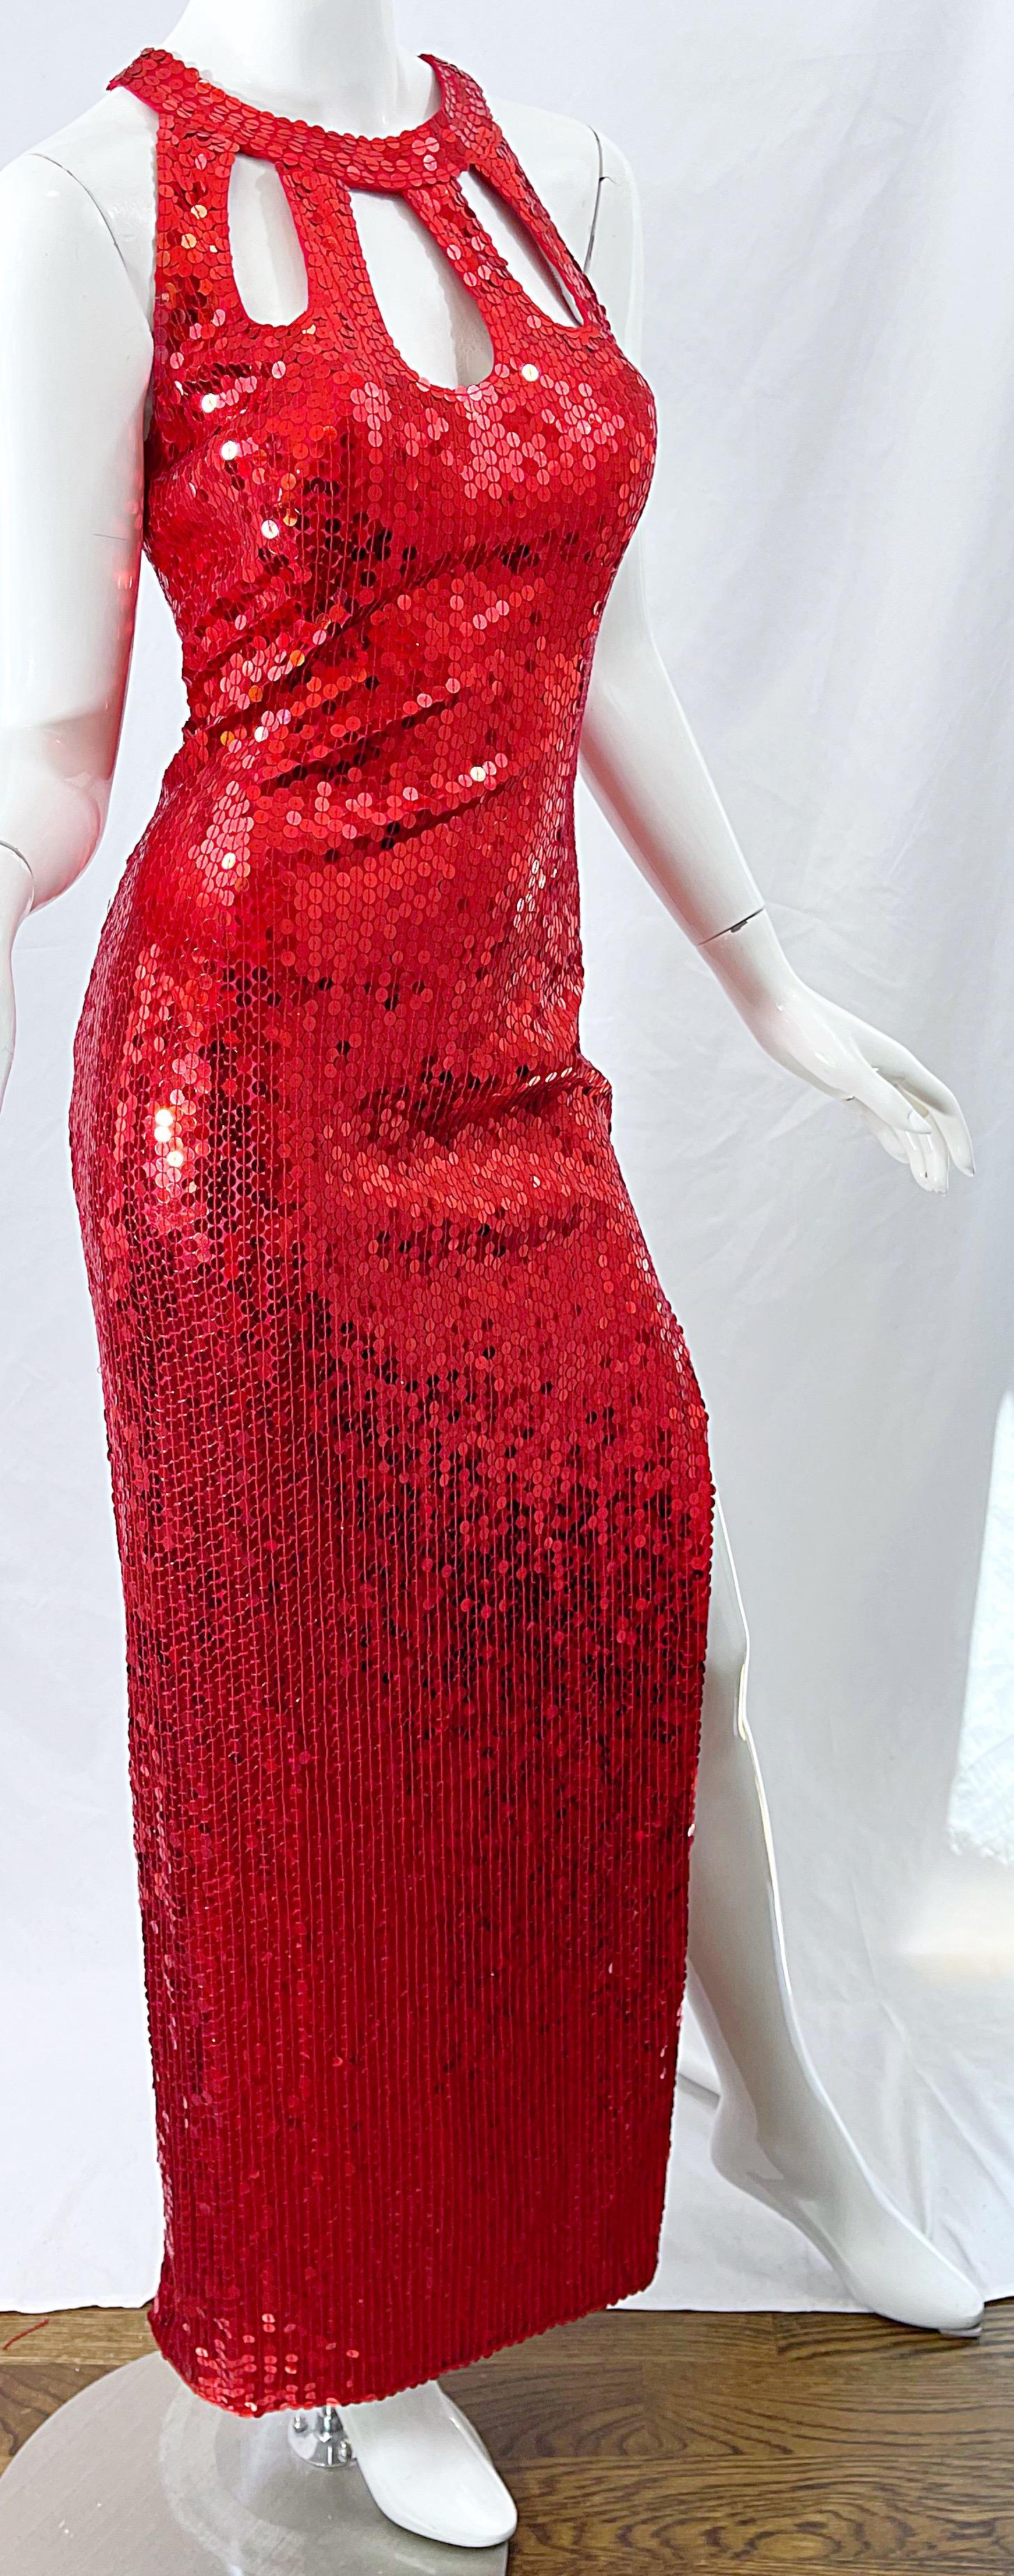 1990s Lipstick Red Sequin Size 10 Sexy Cut Out Vintage 90s Evening Gown Dress In Excellent Condition For Sale In San Diego, CA